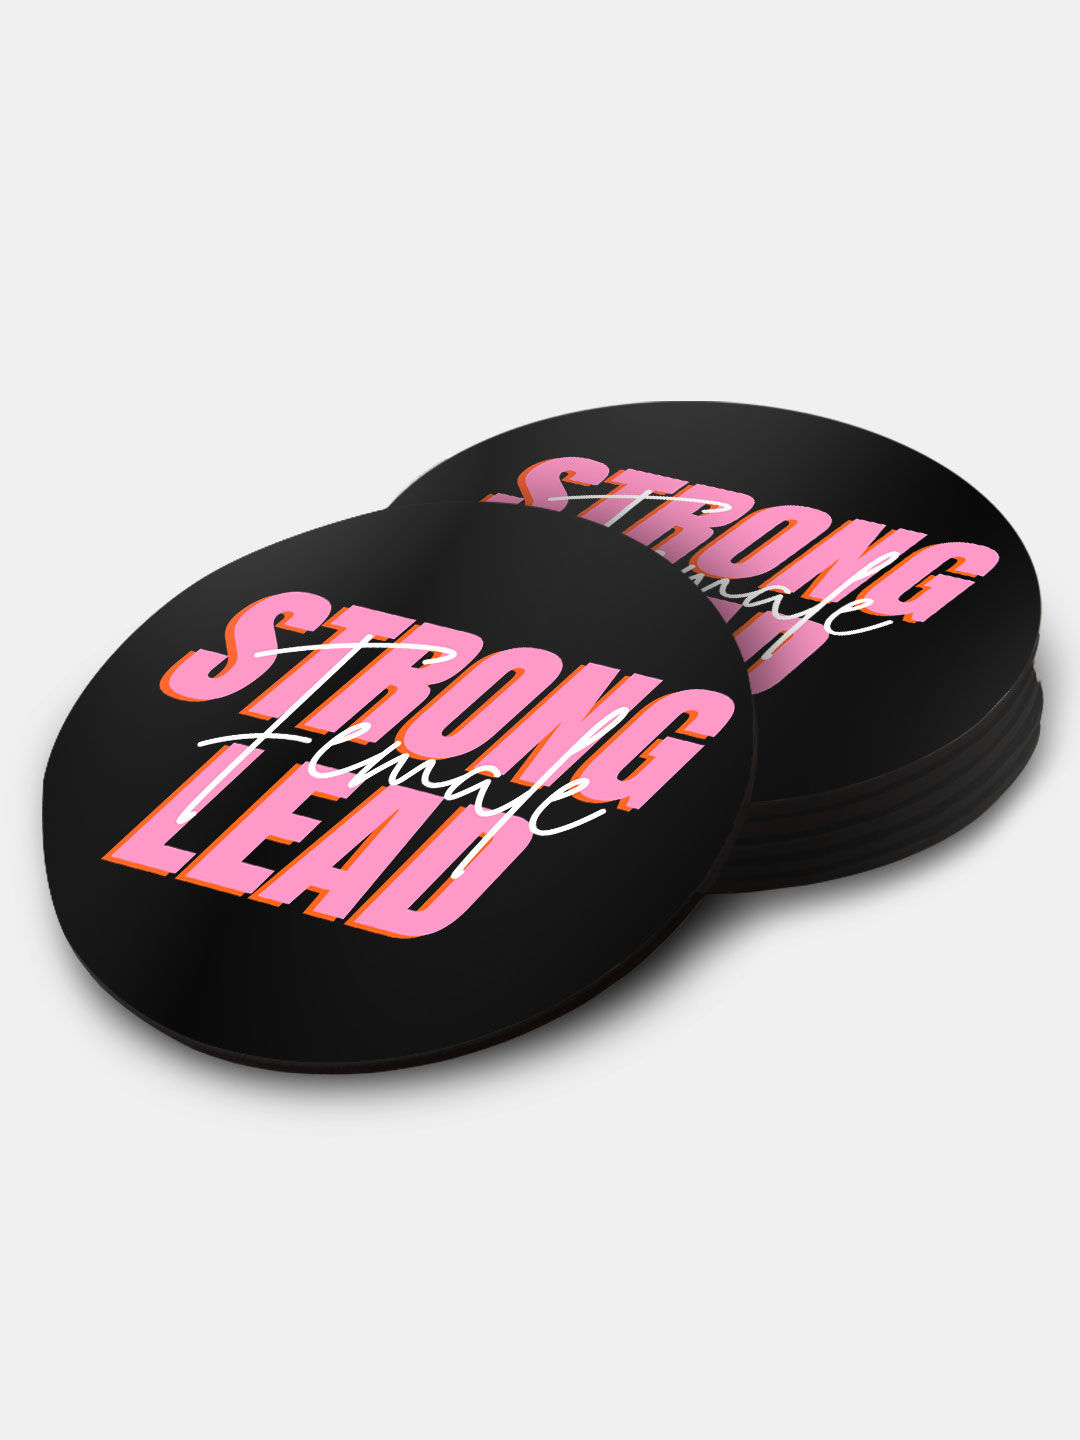 Buy Valentine Strong Lead - Circular Coasters Coasters Online